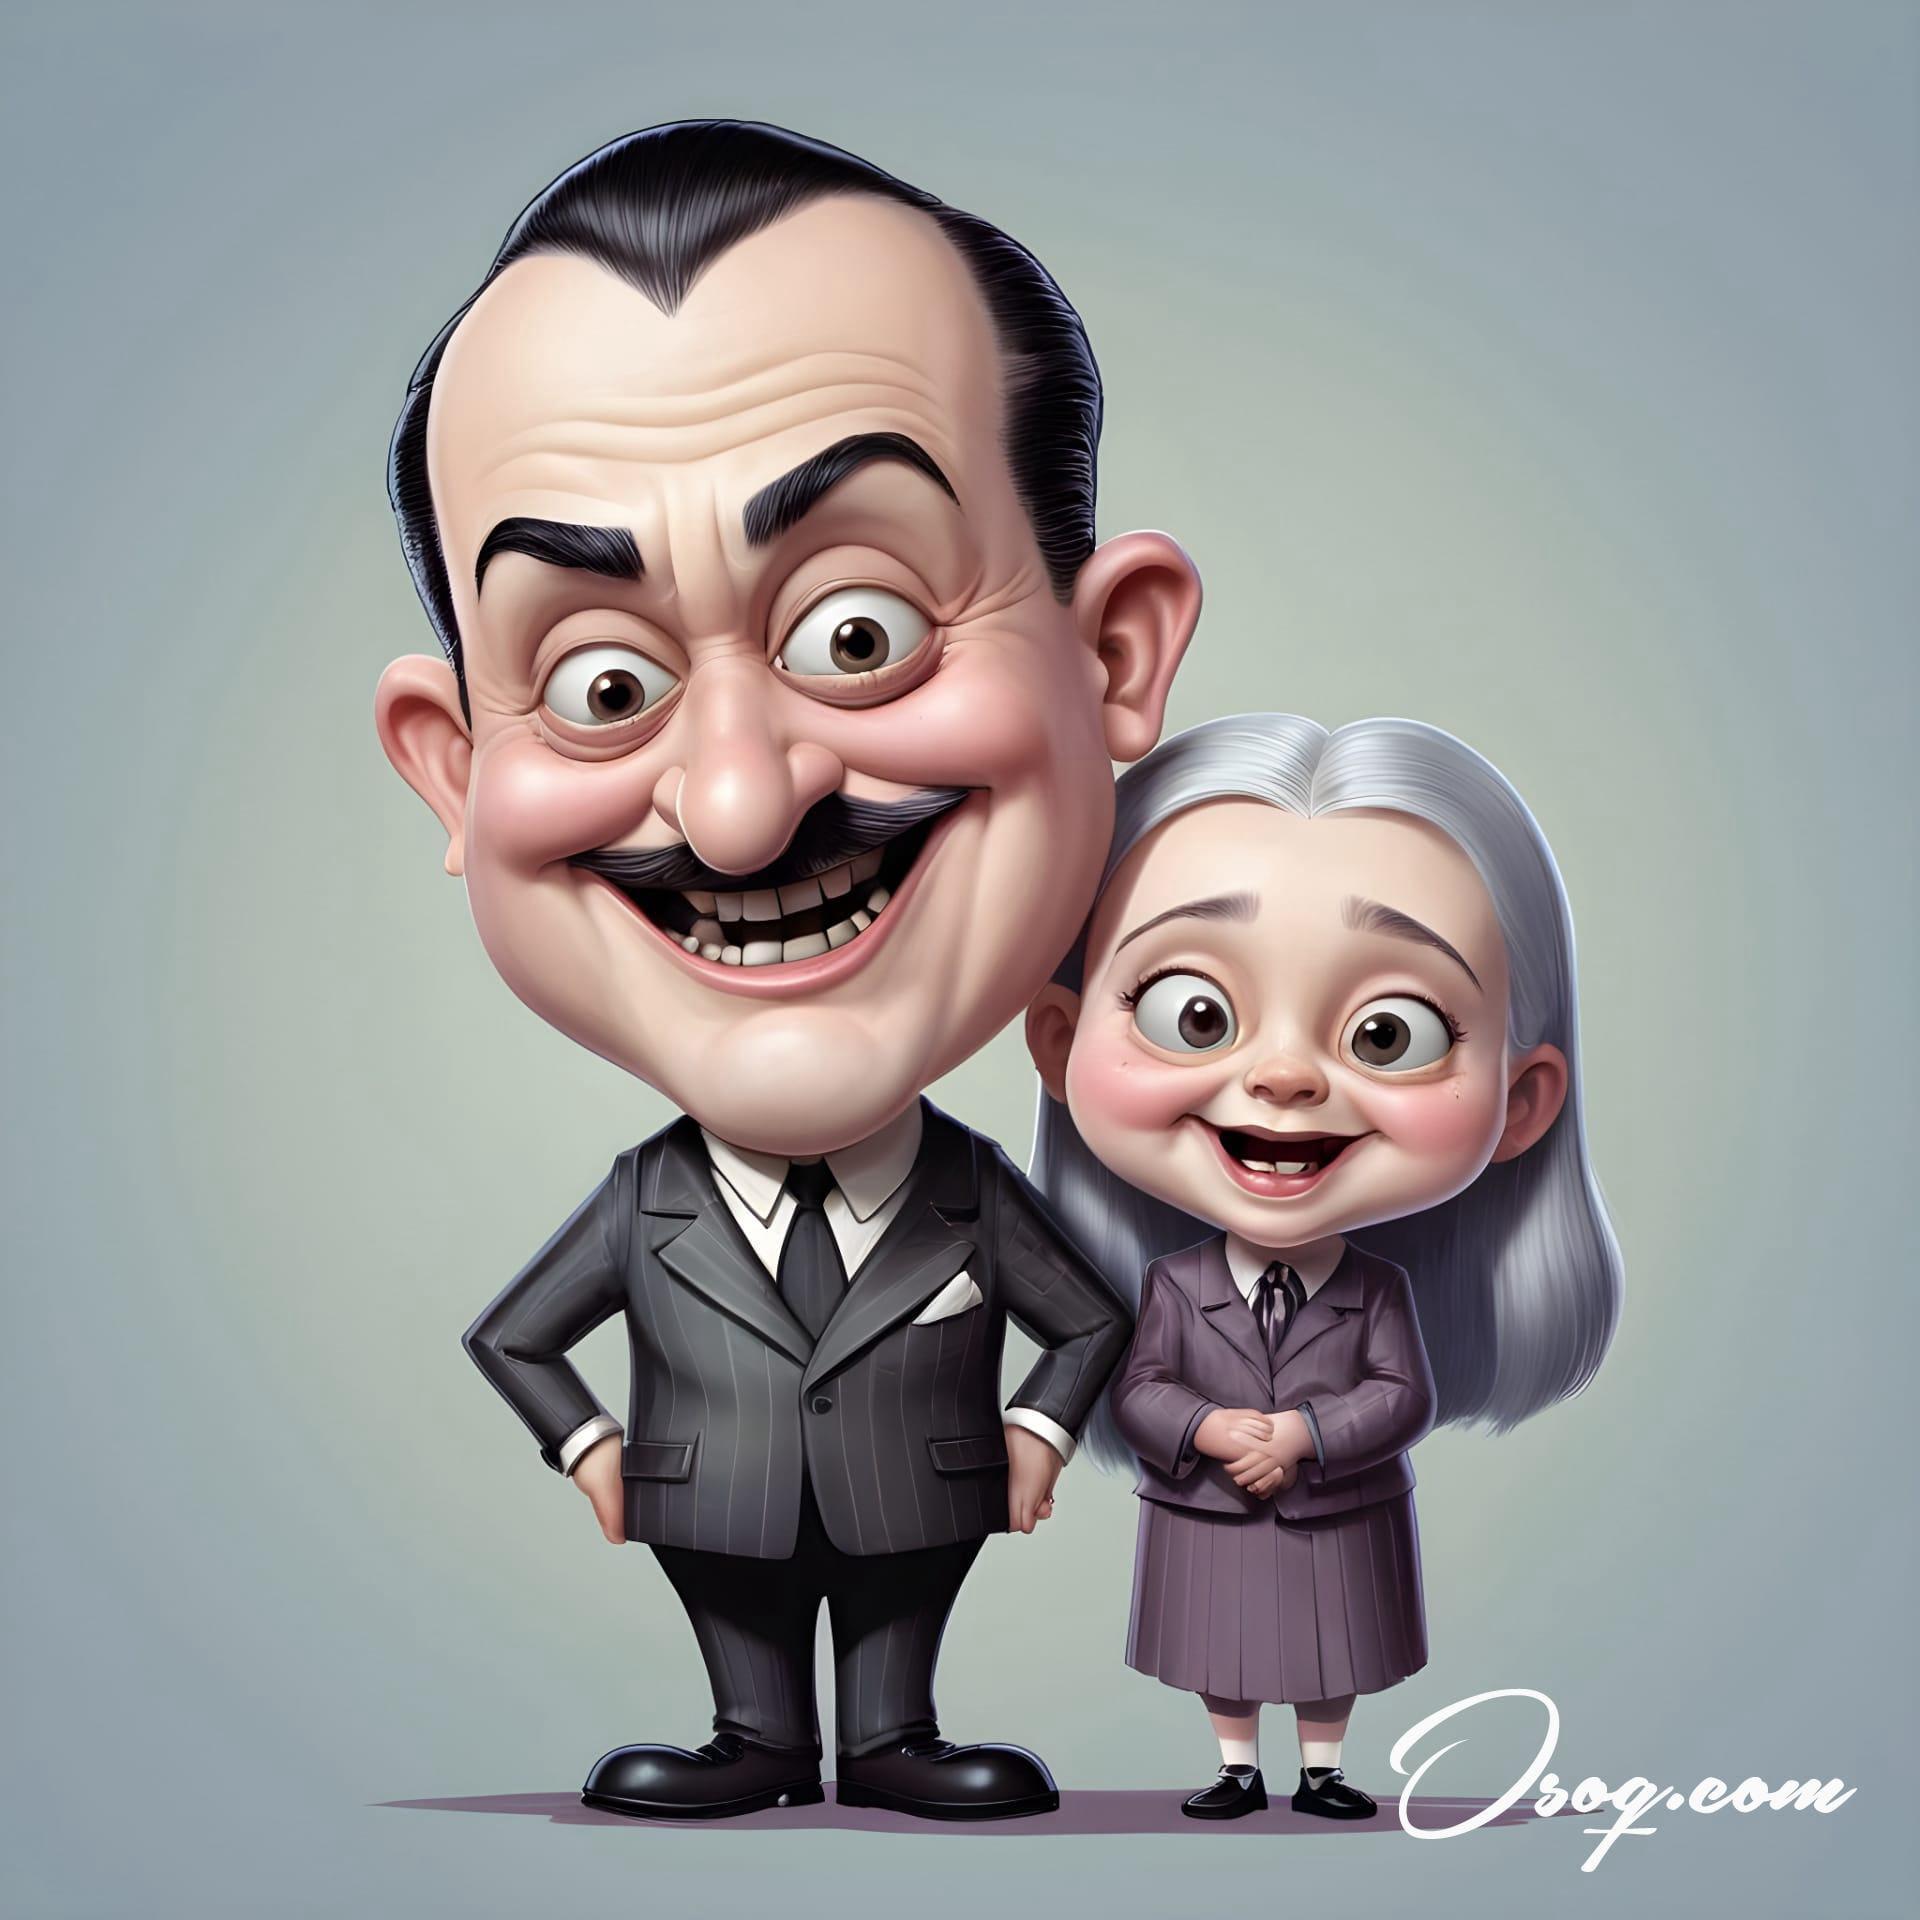 Addams family caricature 11